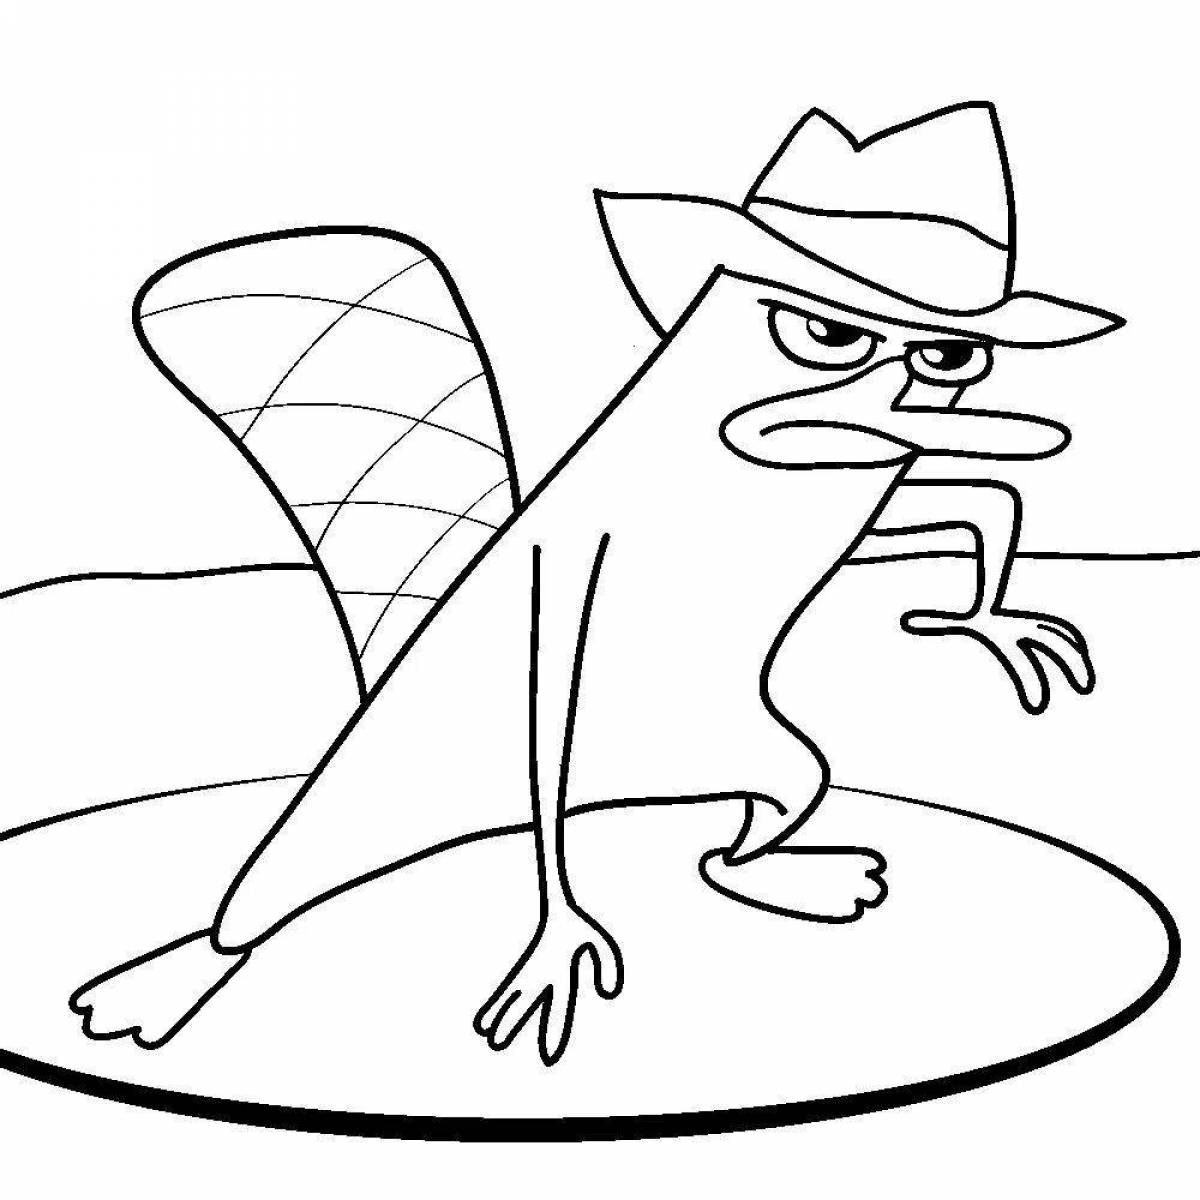 Coloring page glamorous platypus perry